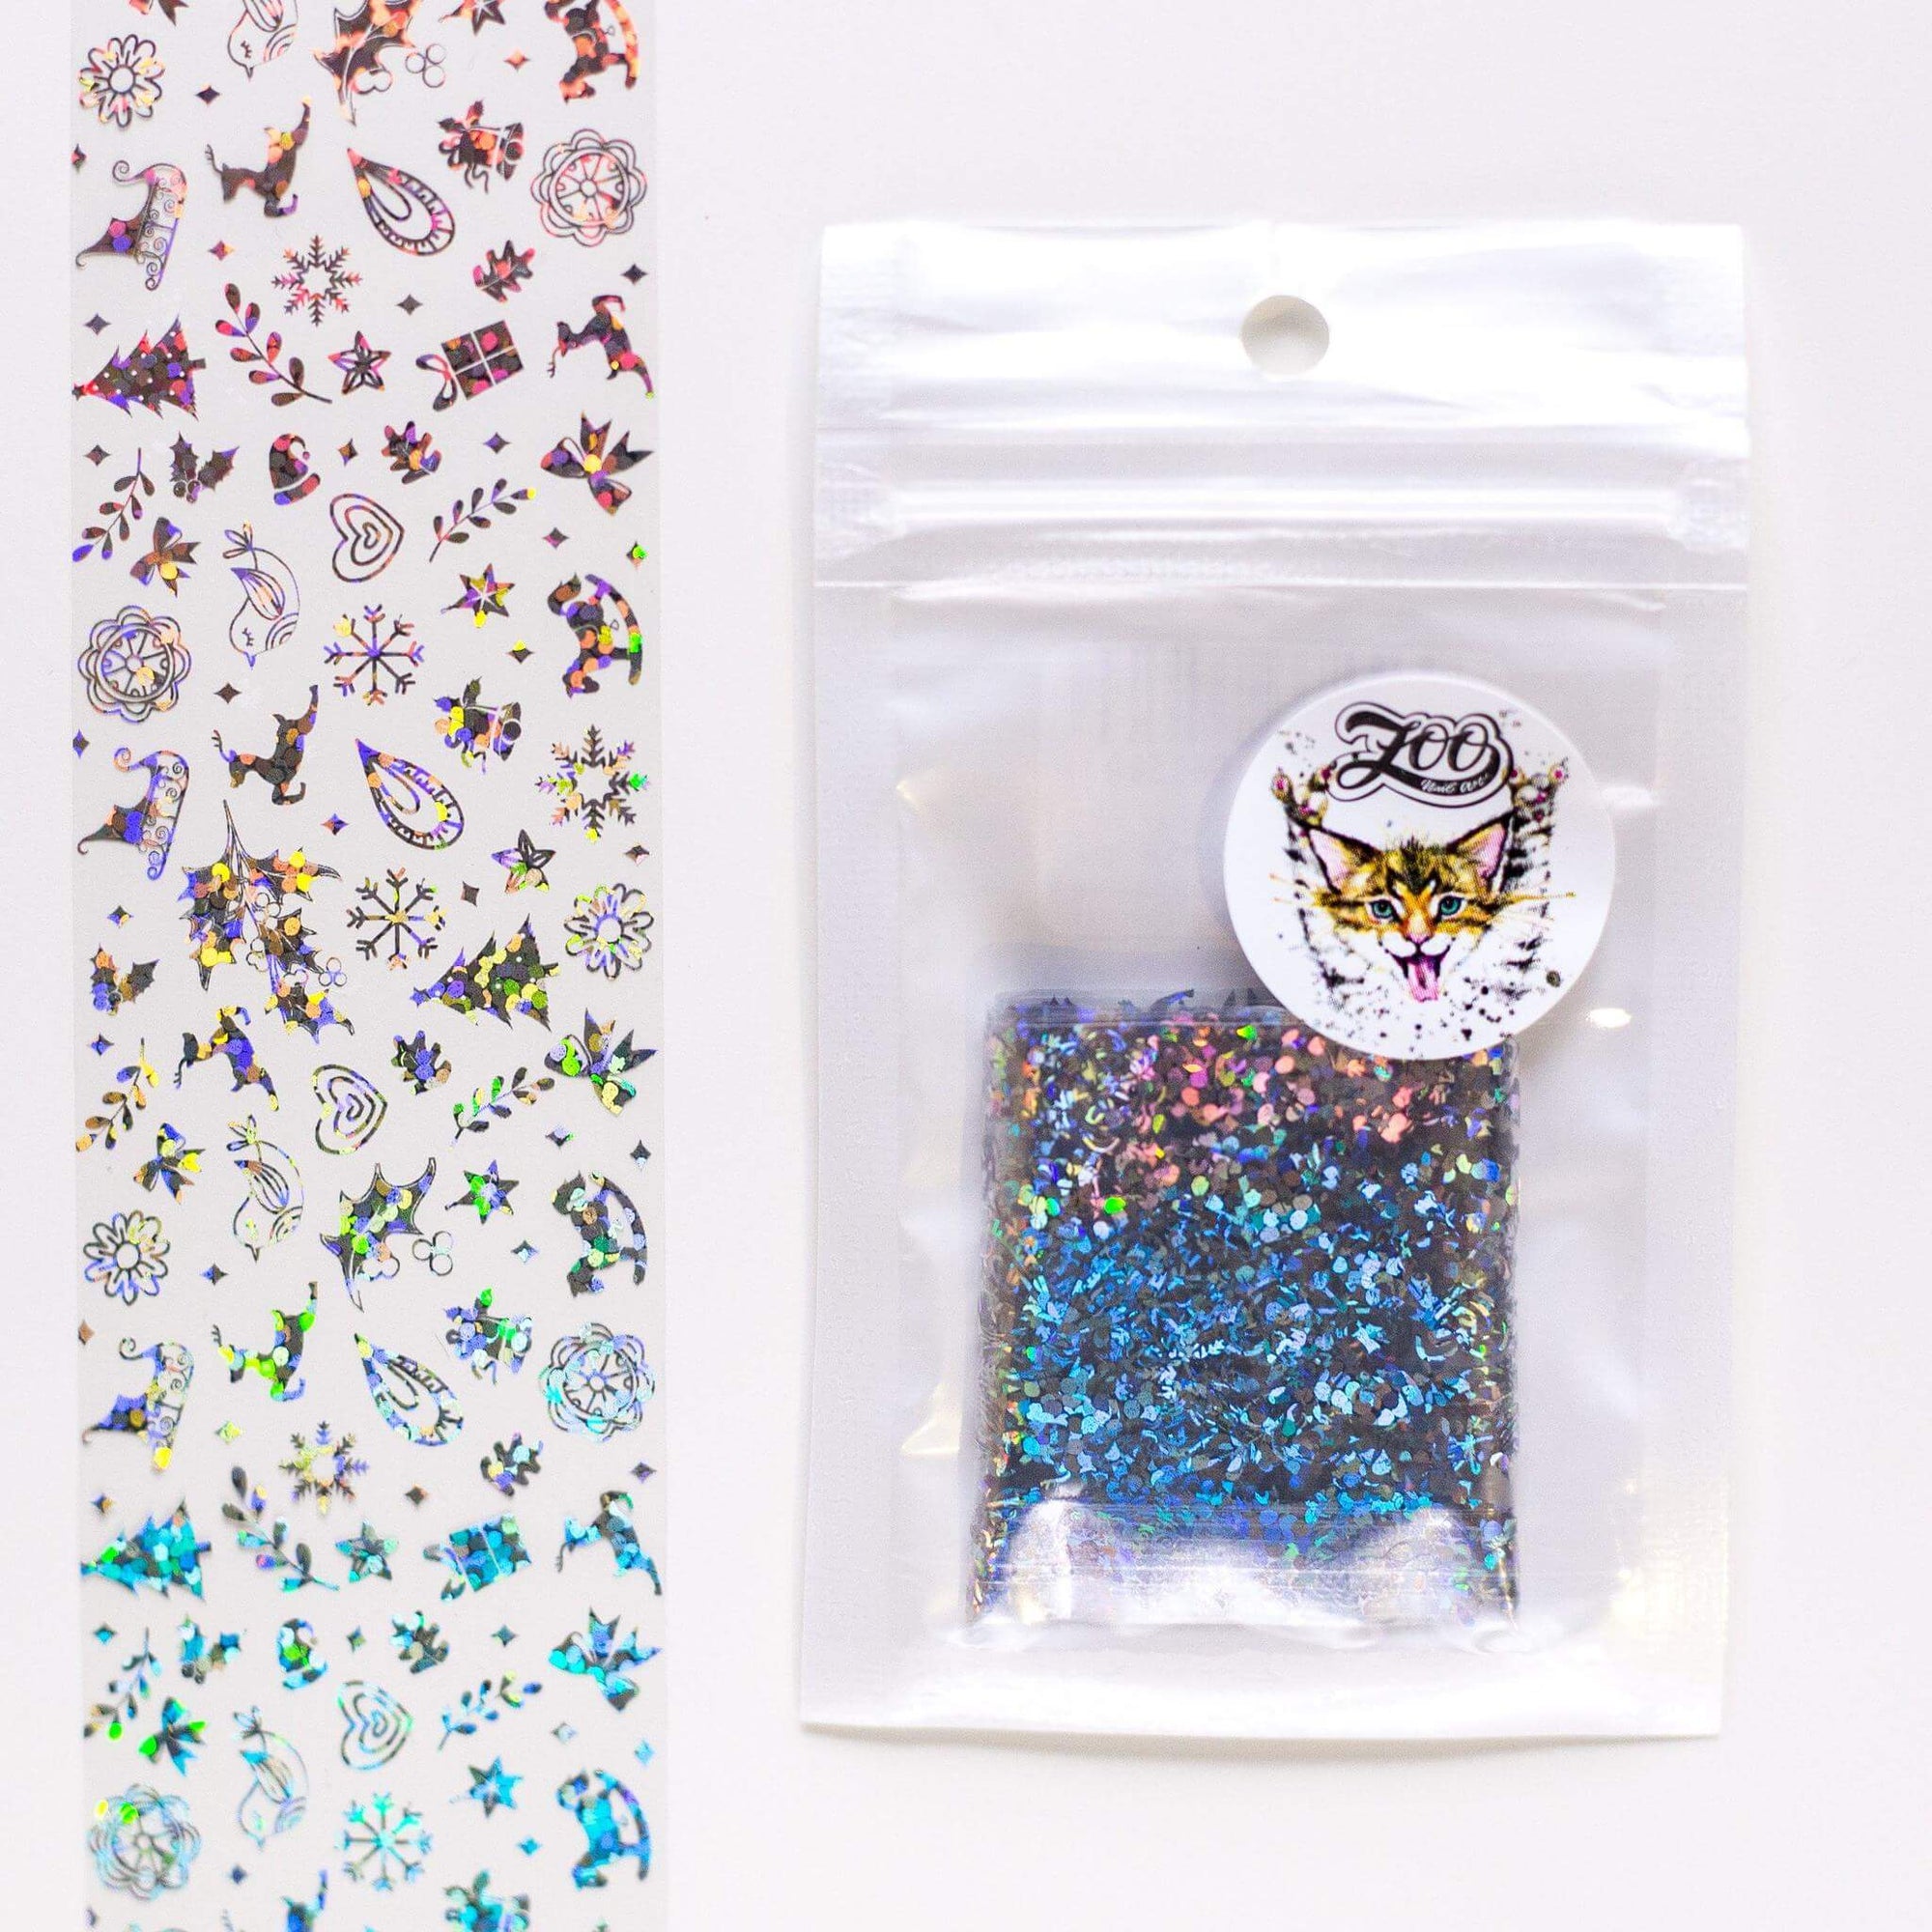 Zoo Nail Art Transfer Foil- New Year's Transparent Silver